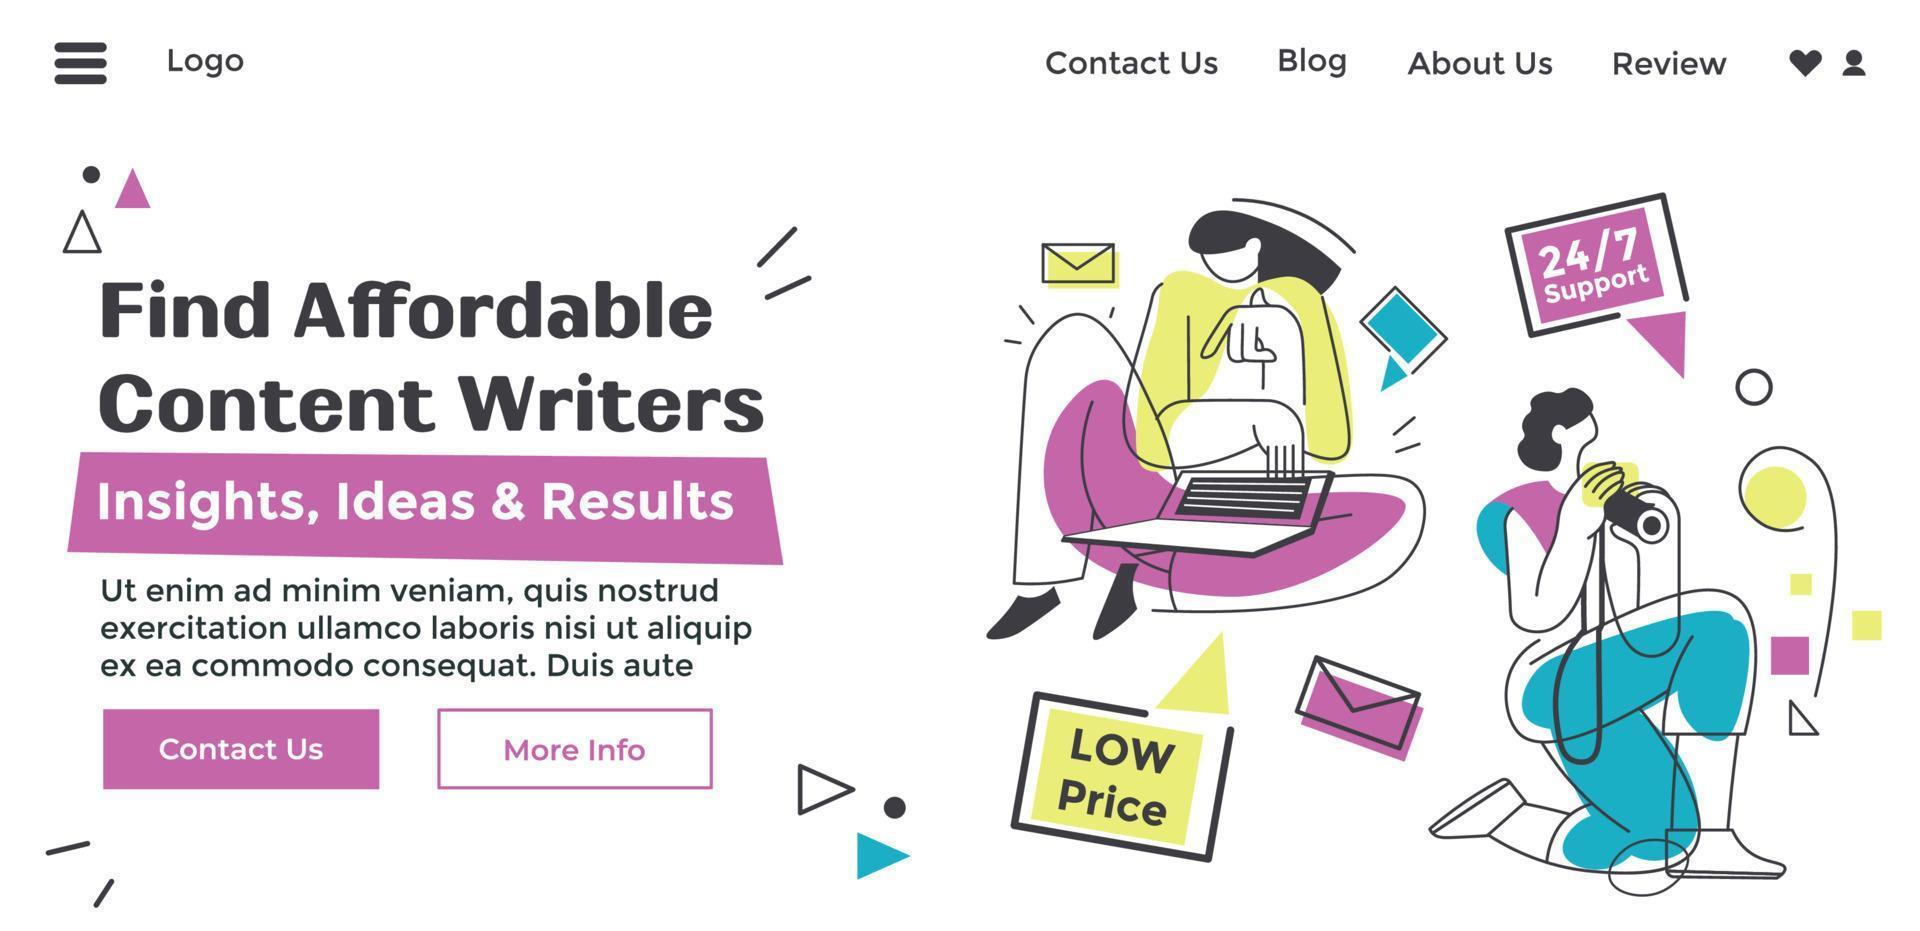 Find affordable content writers, insights ideas vector